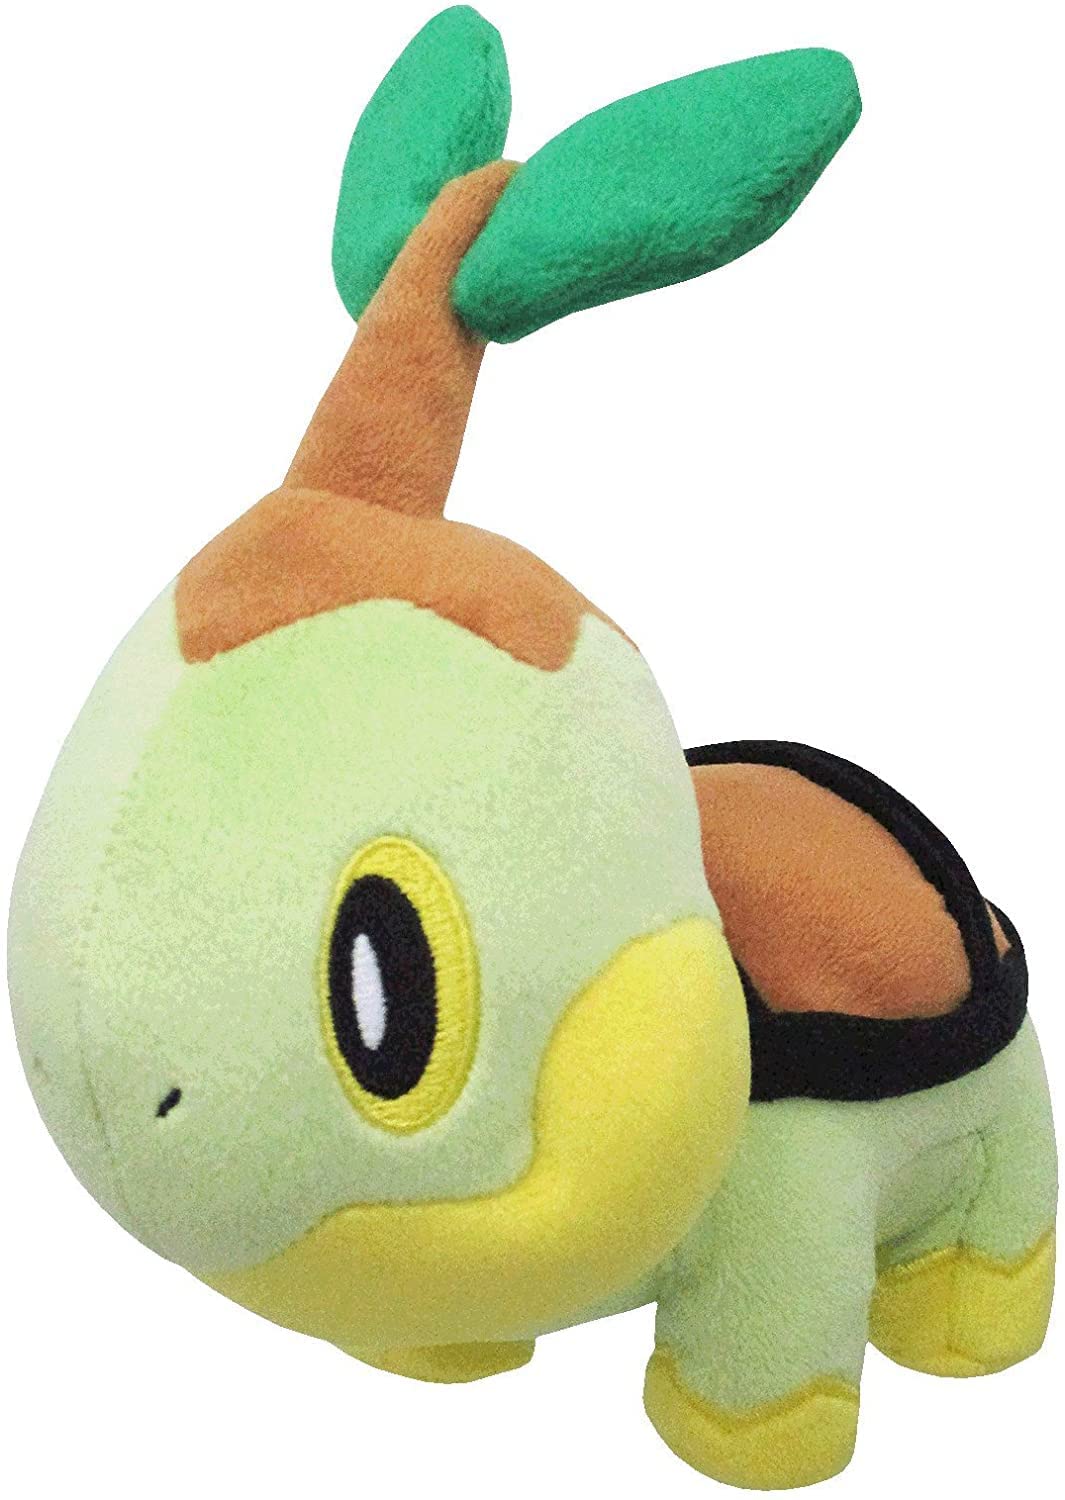 Sanei All Star Collection 6 Inch Plush - Turtwig PP087